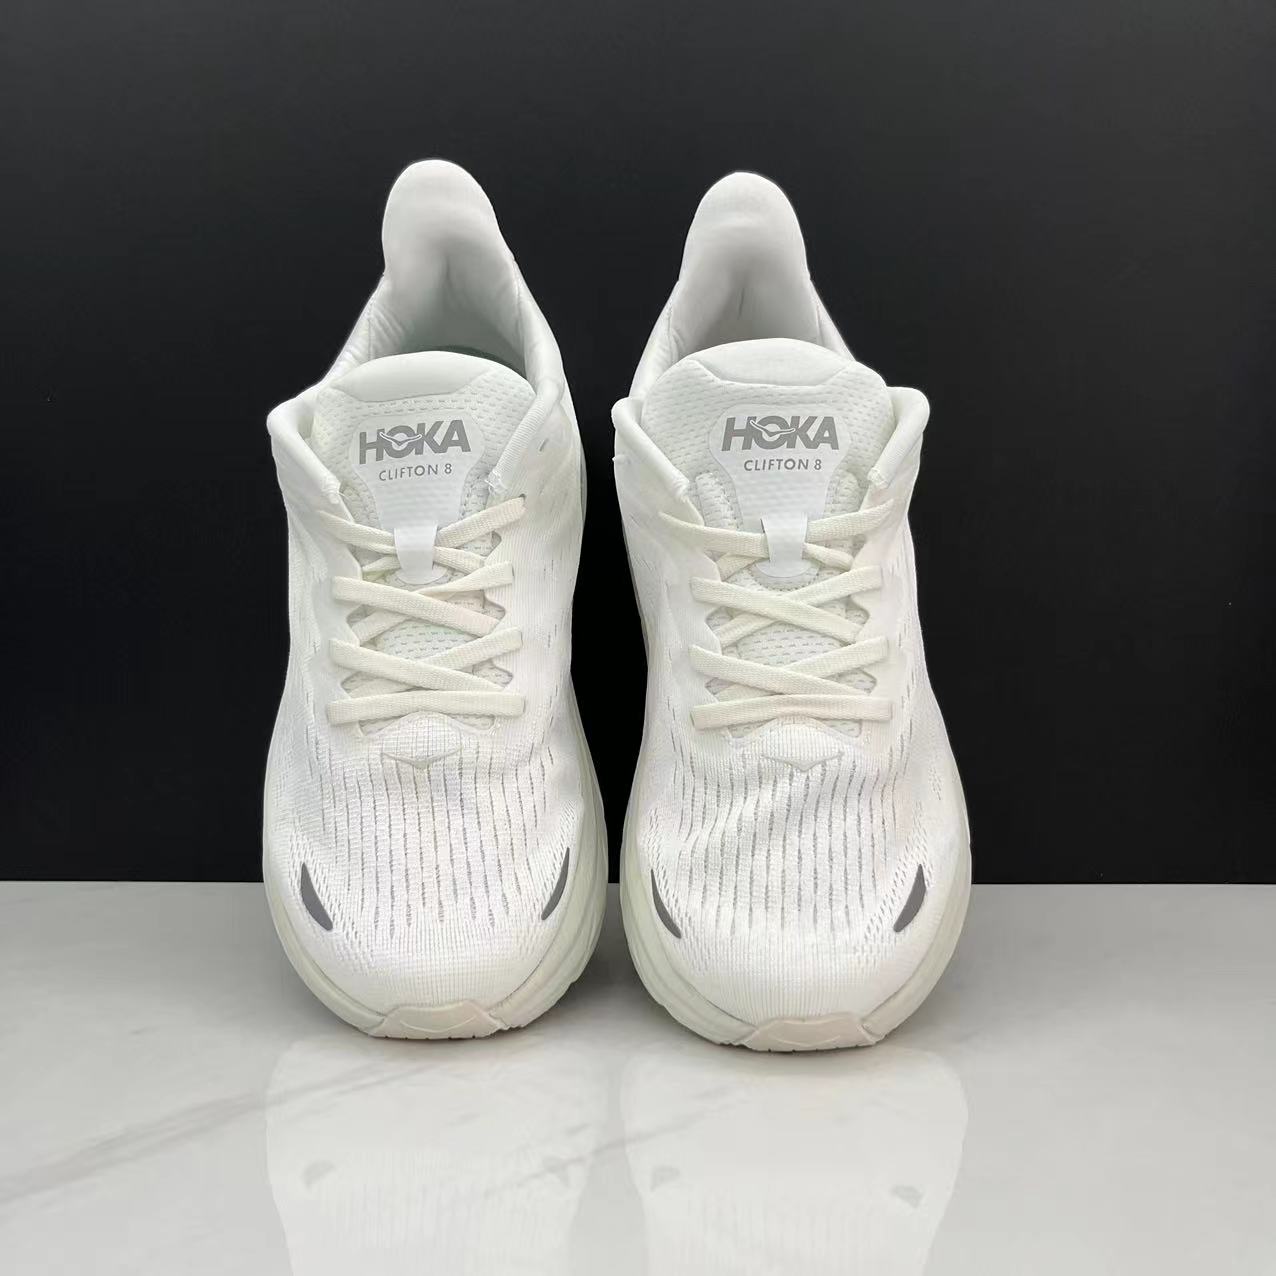 HOKA ONE Clifton 8 Sport Running Shoes Breathable Anti Slip Sports Running Trainers